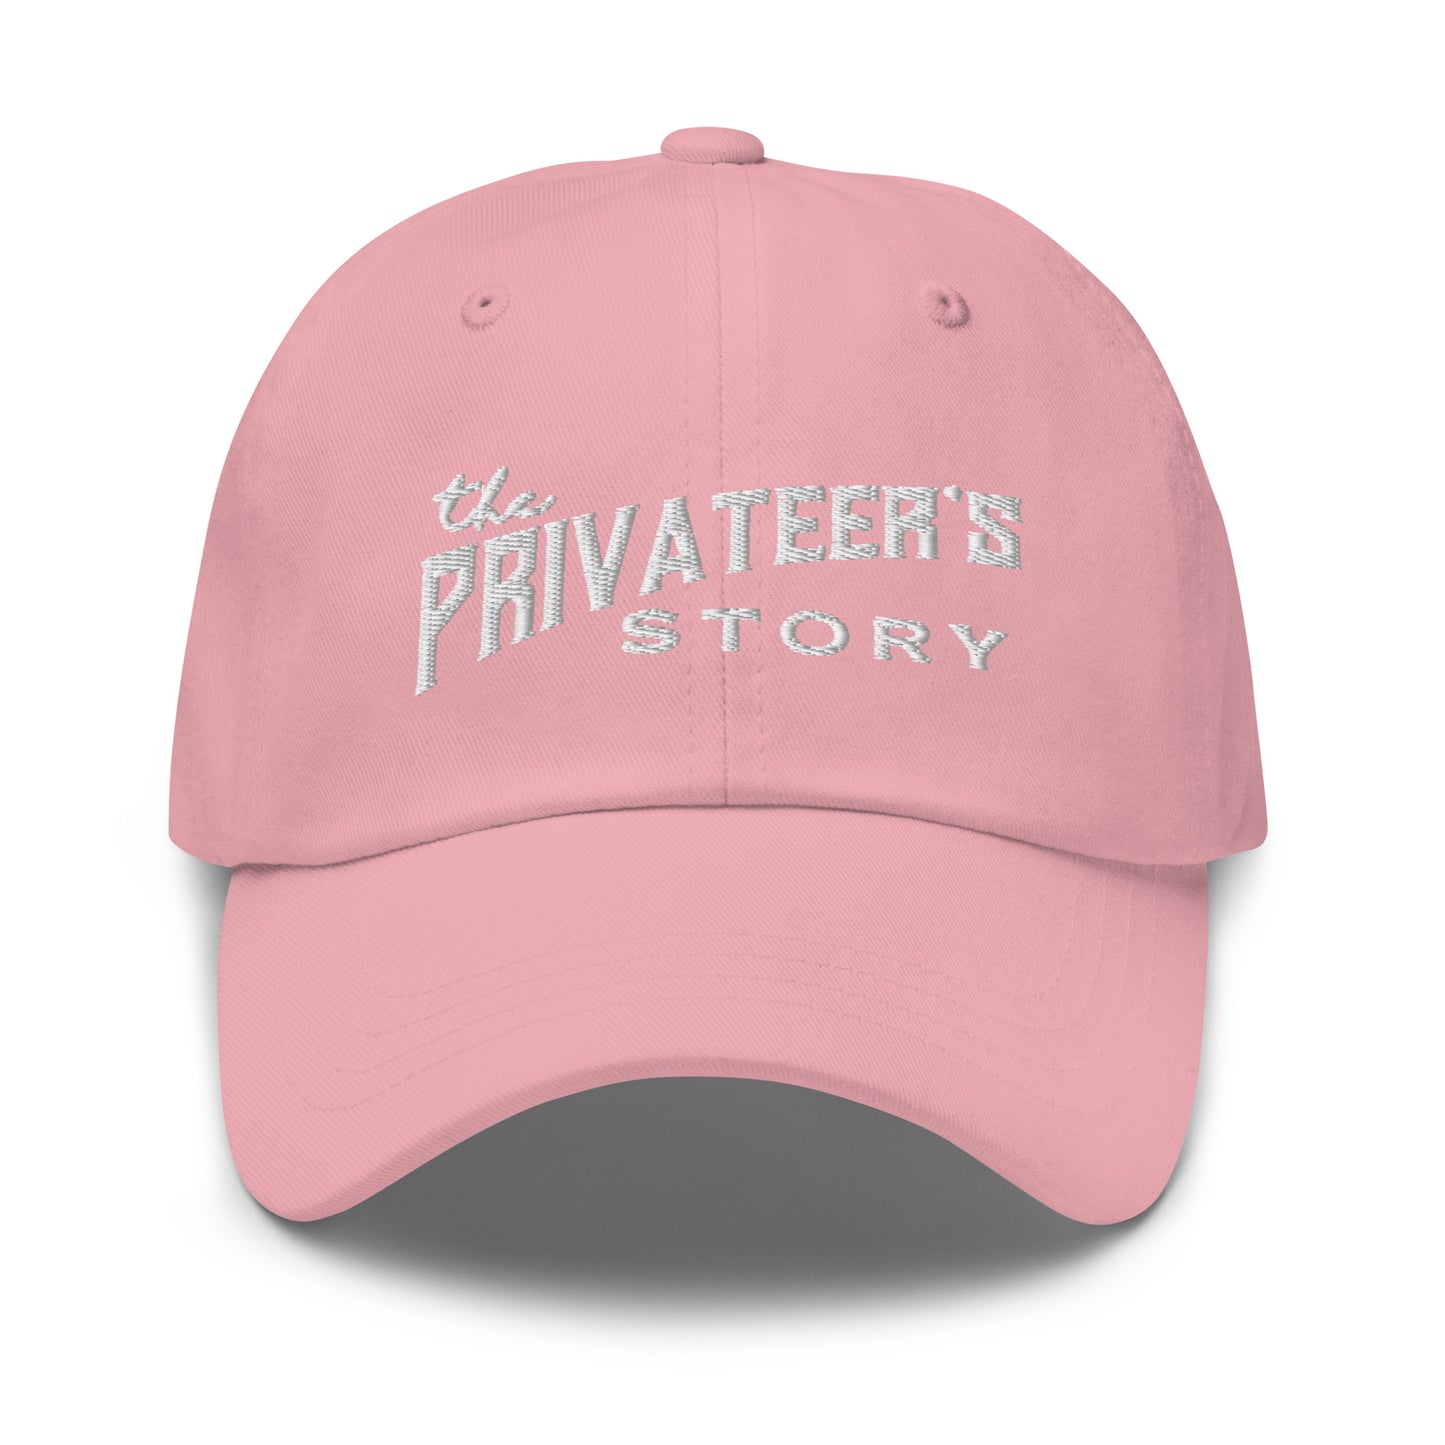 The Privateers Story Dad Hat